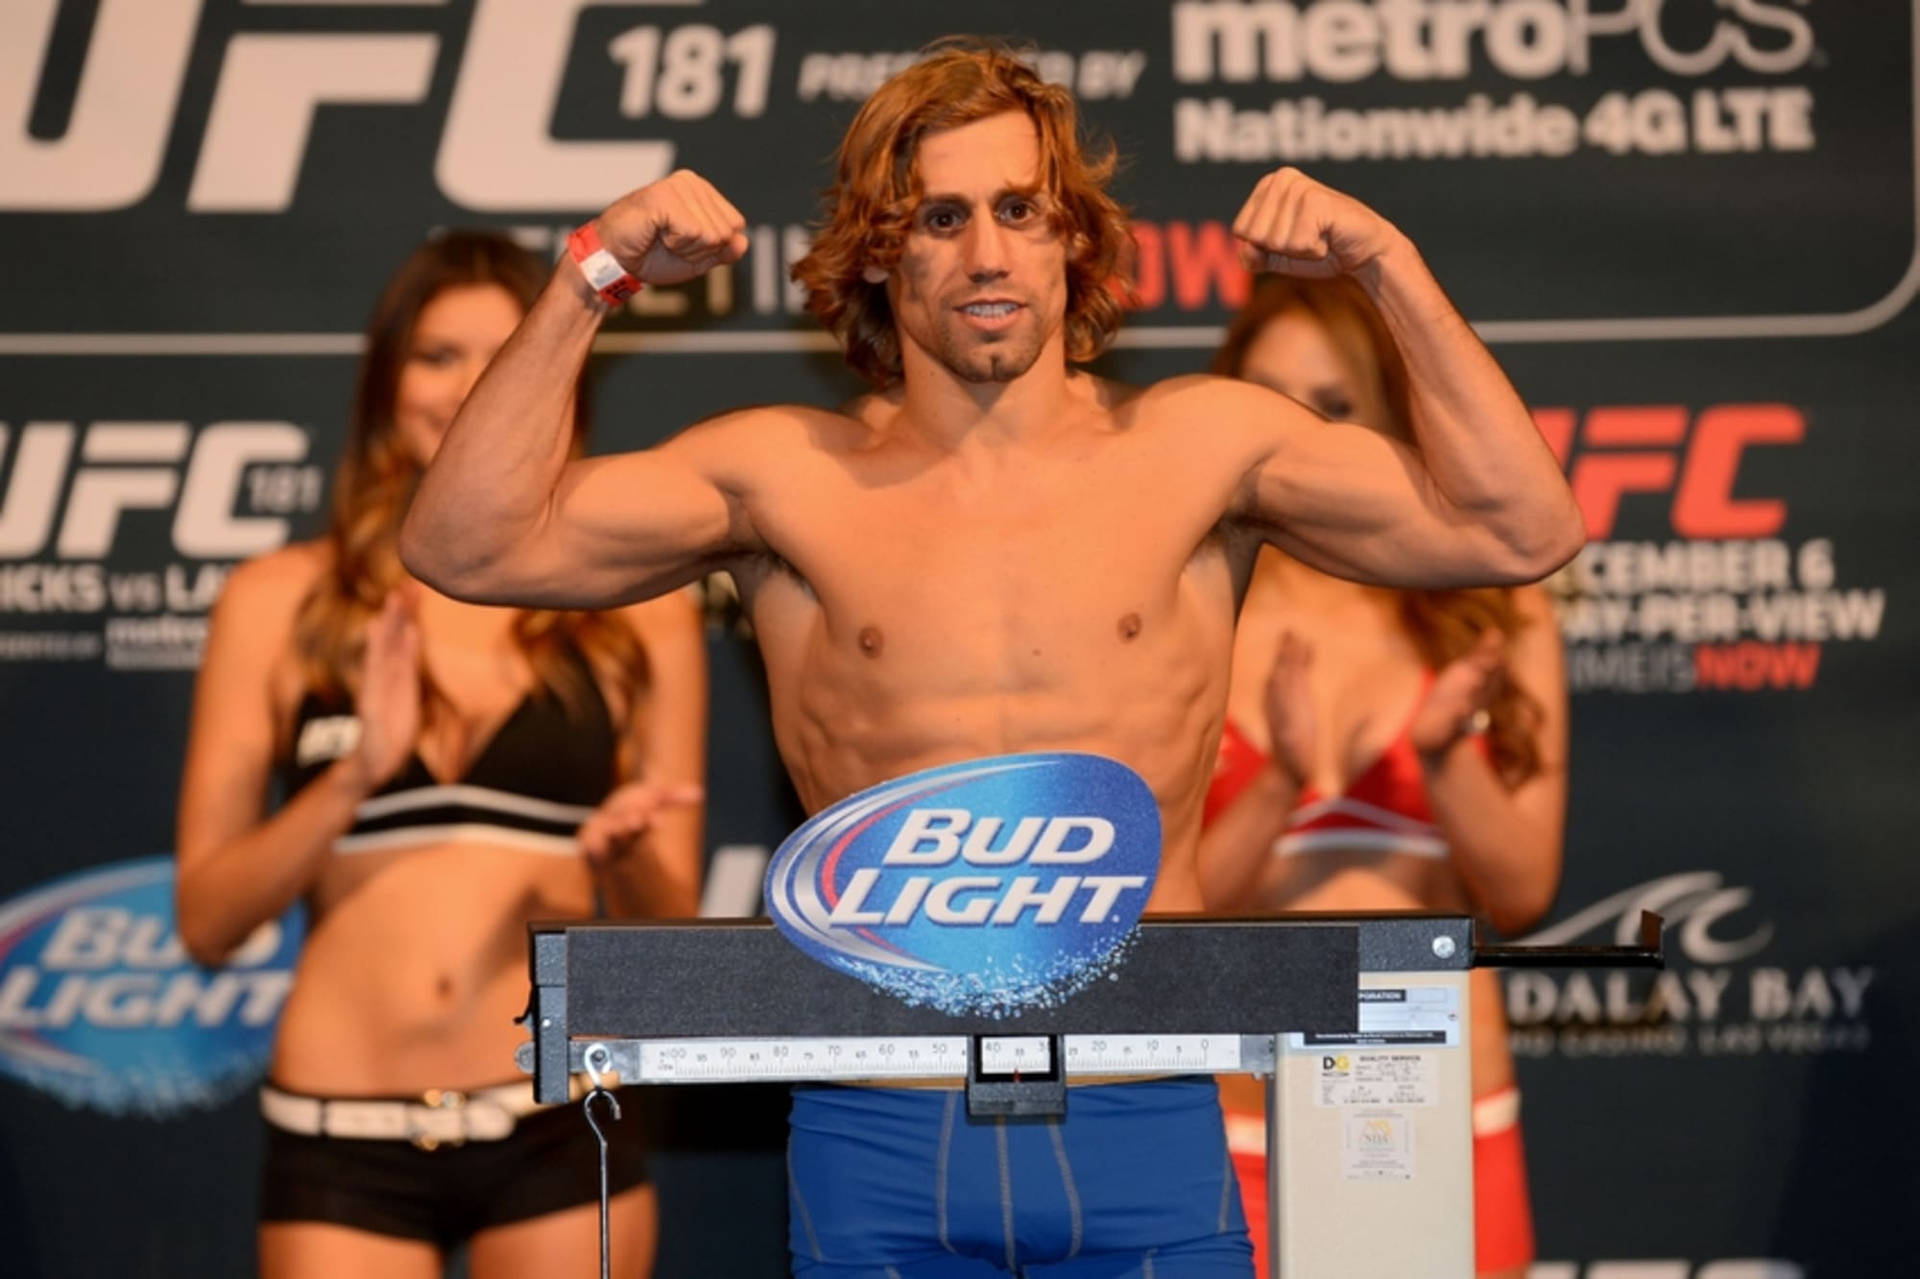 "UFC star Urijah Faber showing off his incredible physique." Wallpaper